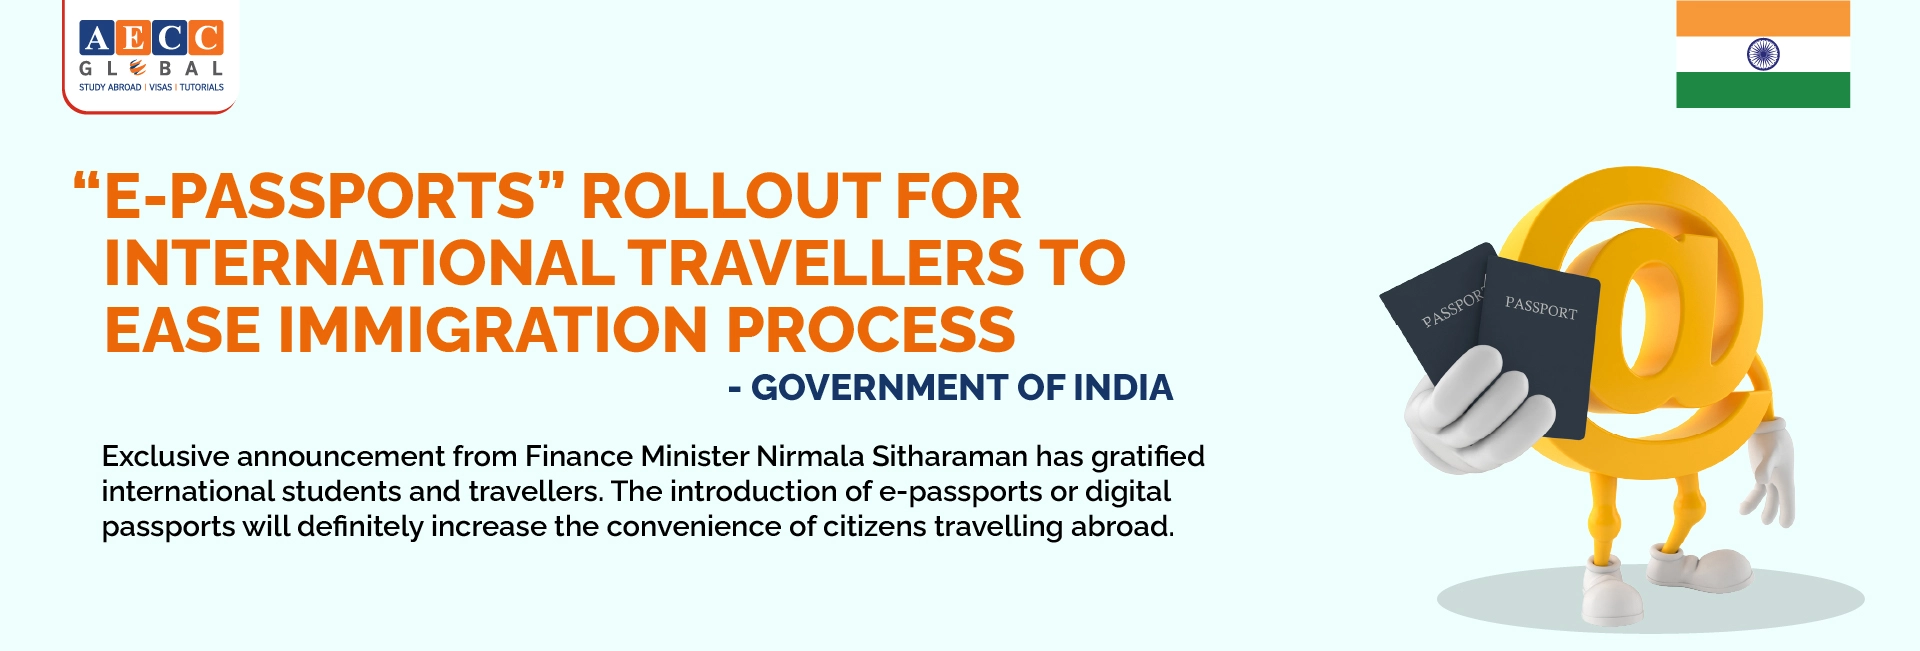 E-Passports” rollout for international travellers to ease immigration process - Government of India